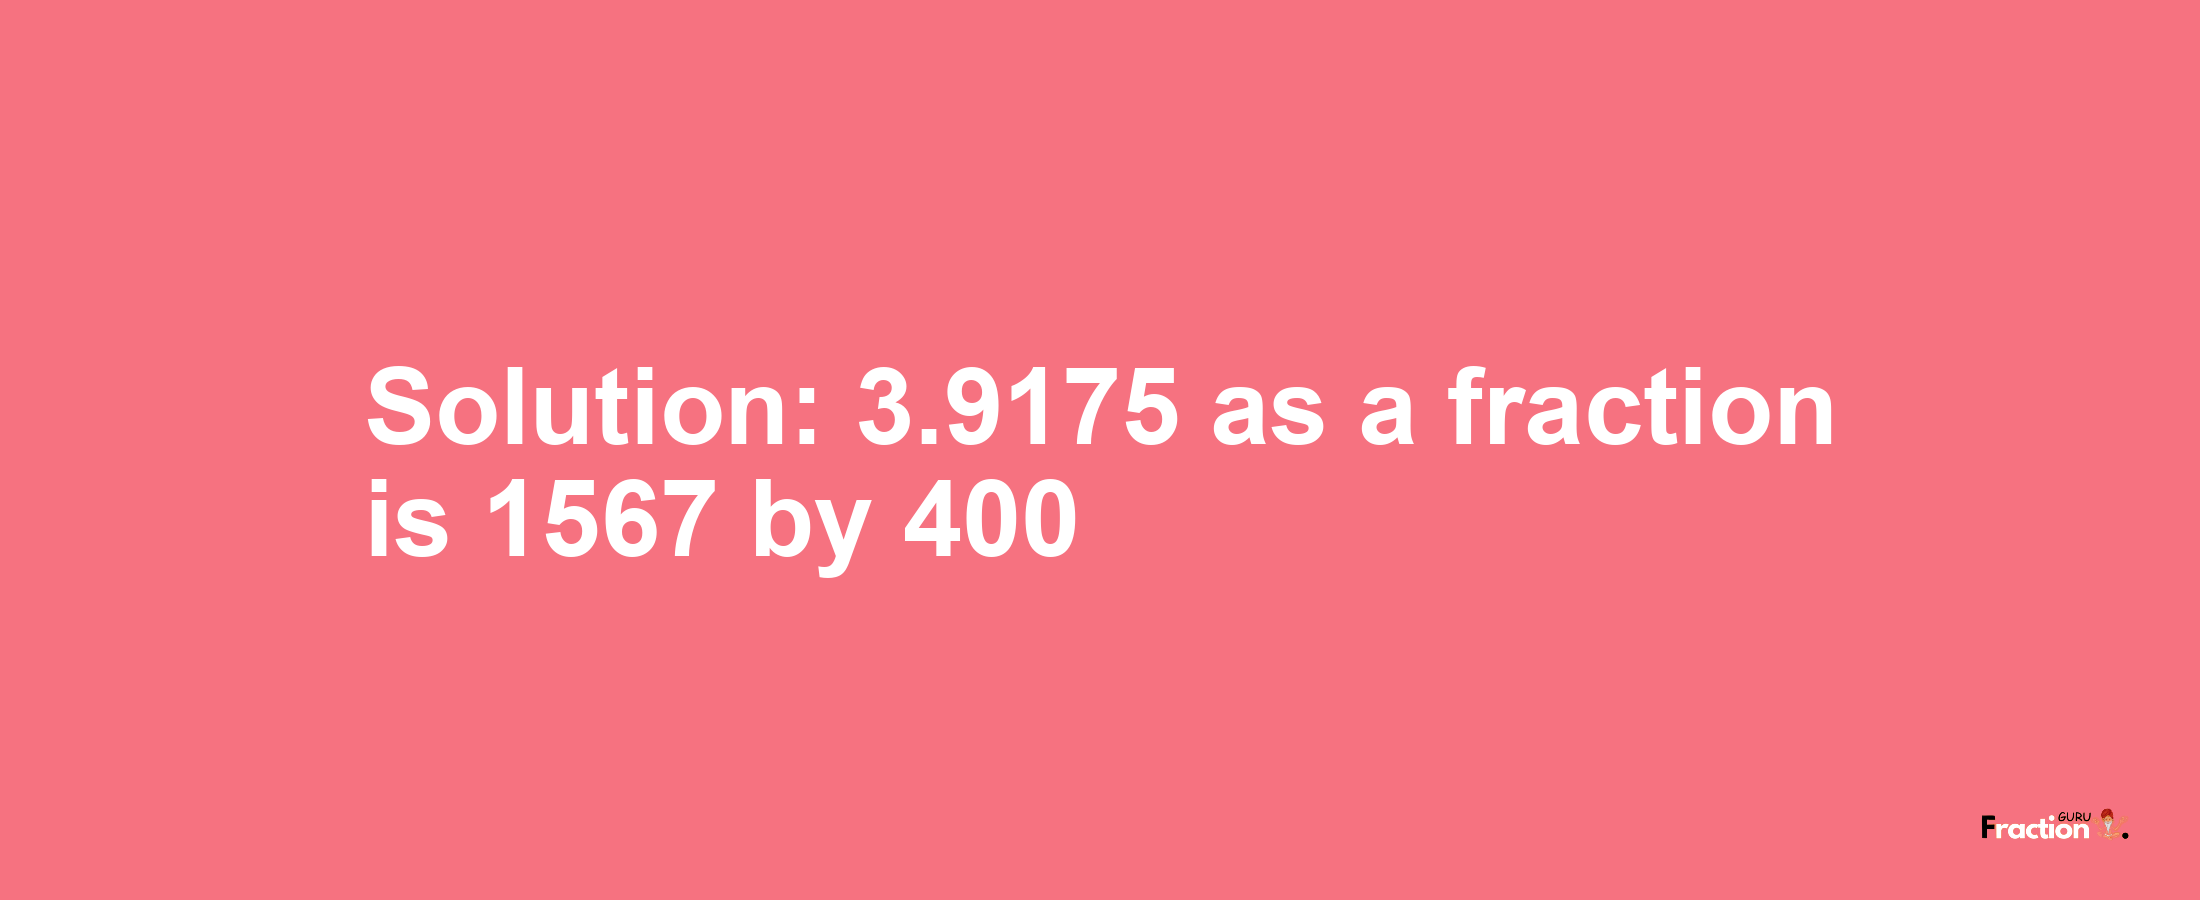 Solution:3.9175 as a fraction is 1567/400